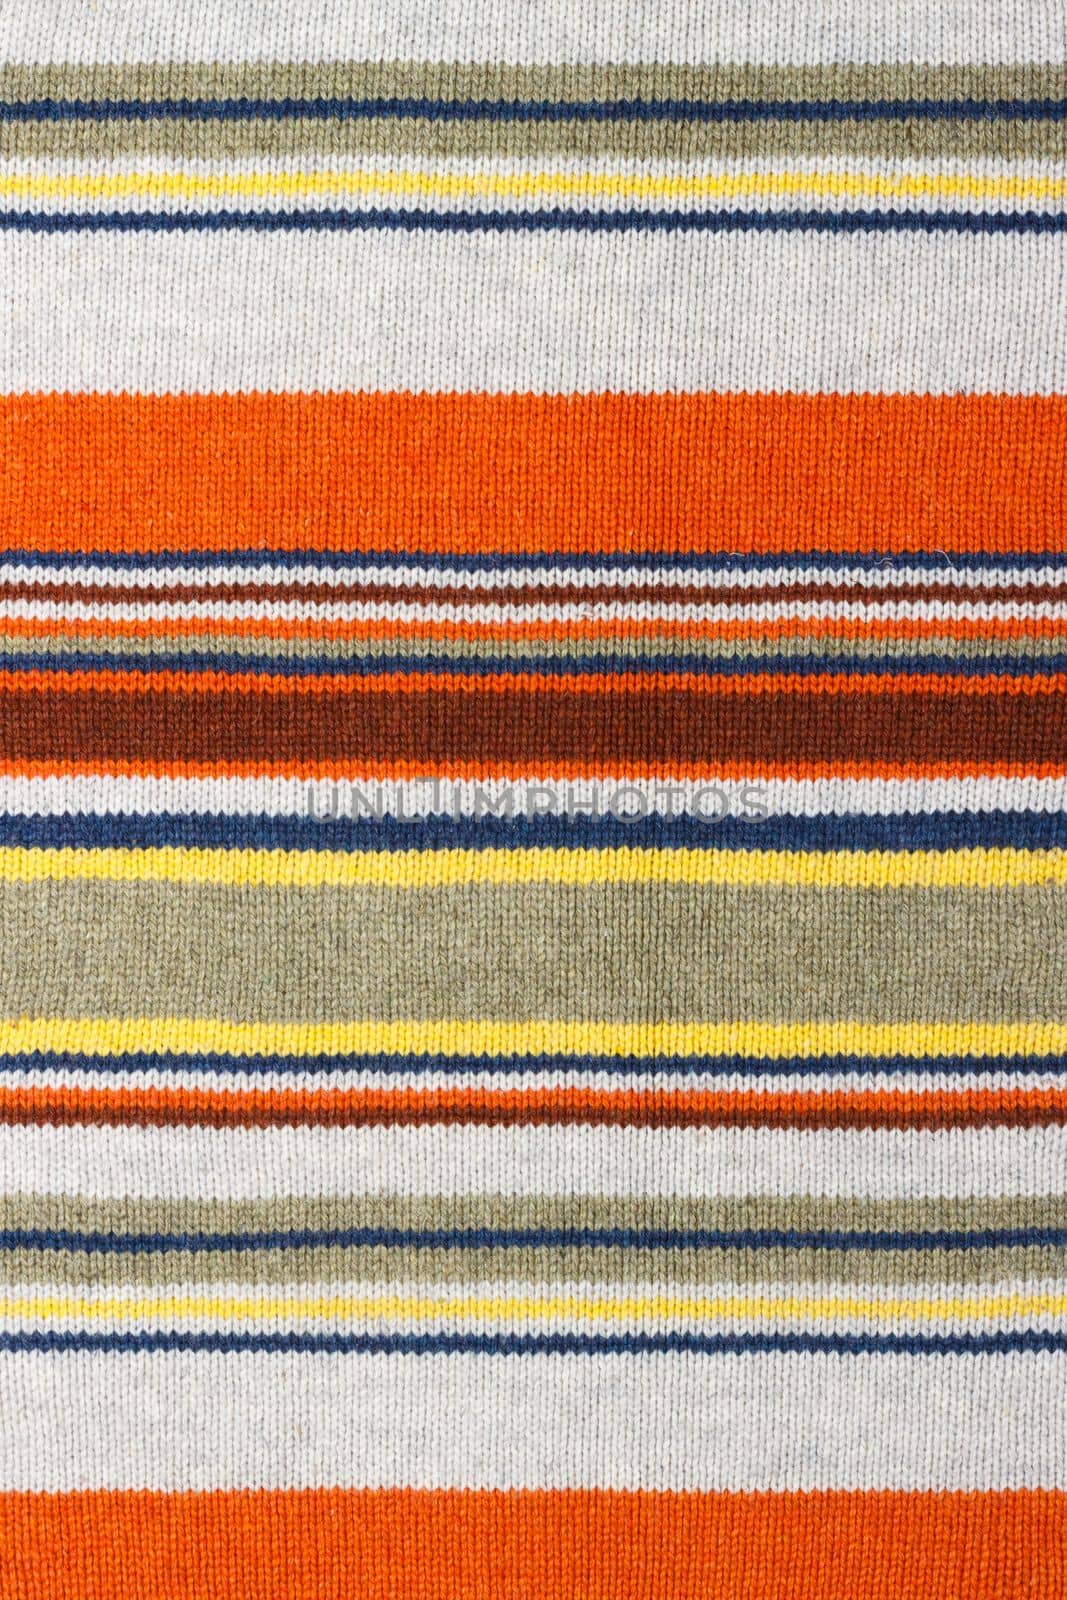 Colorful stripy mohair woolen fabric texture close up. Fabric multicolor background.